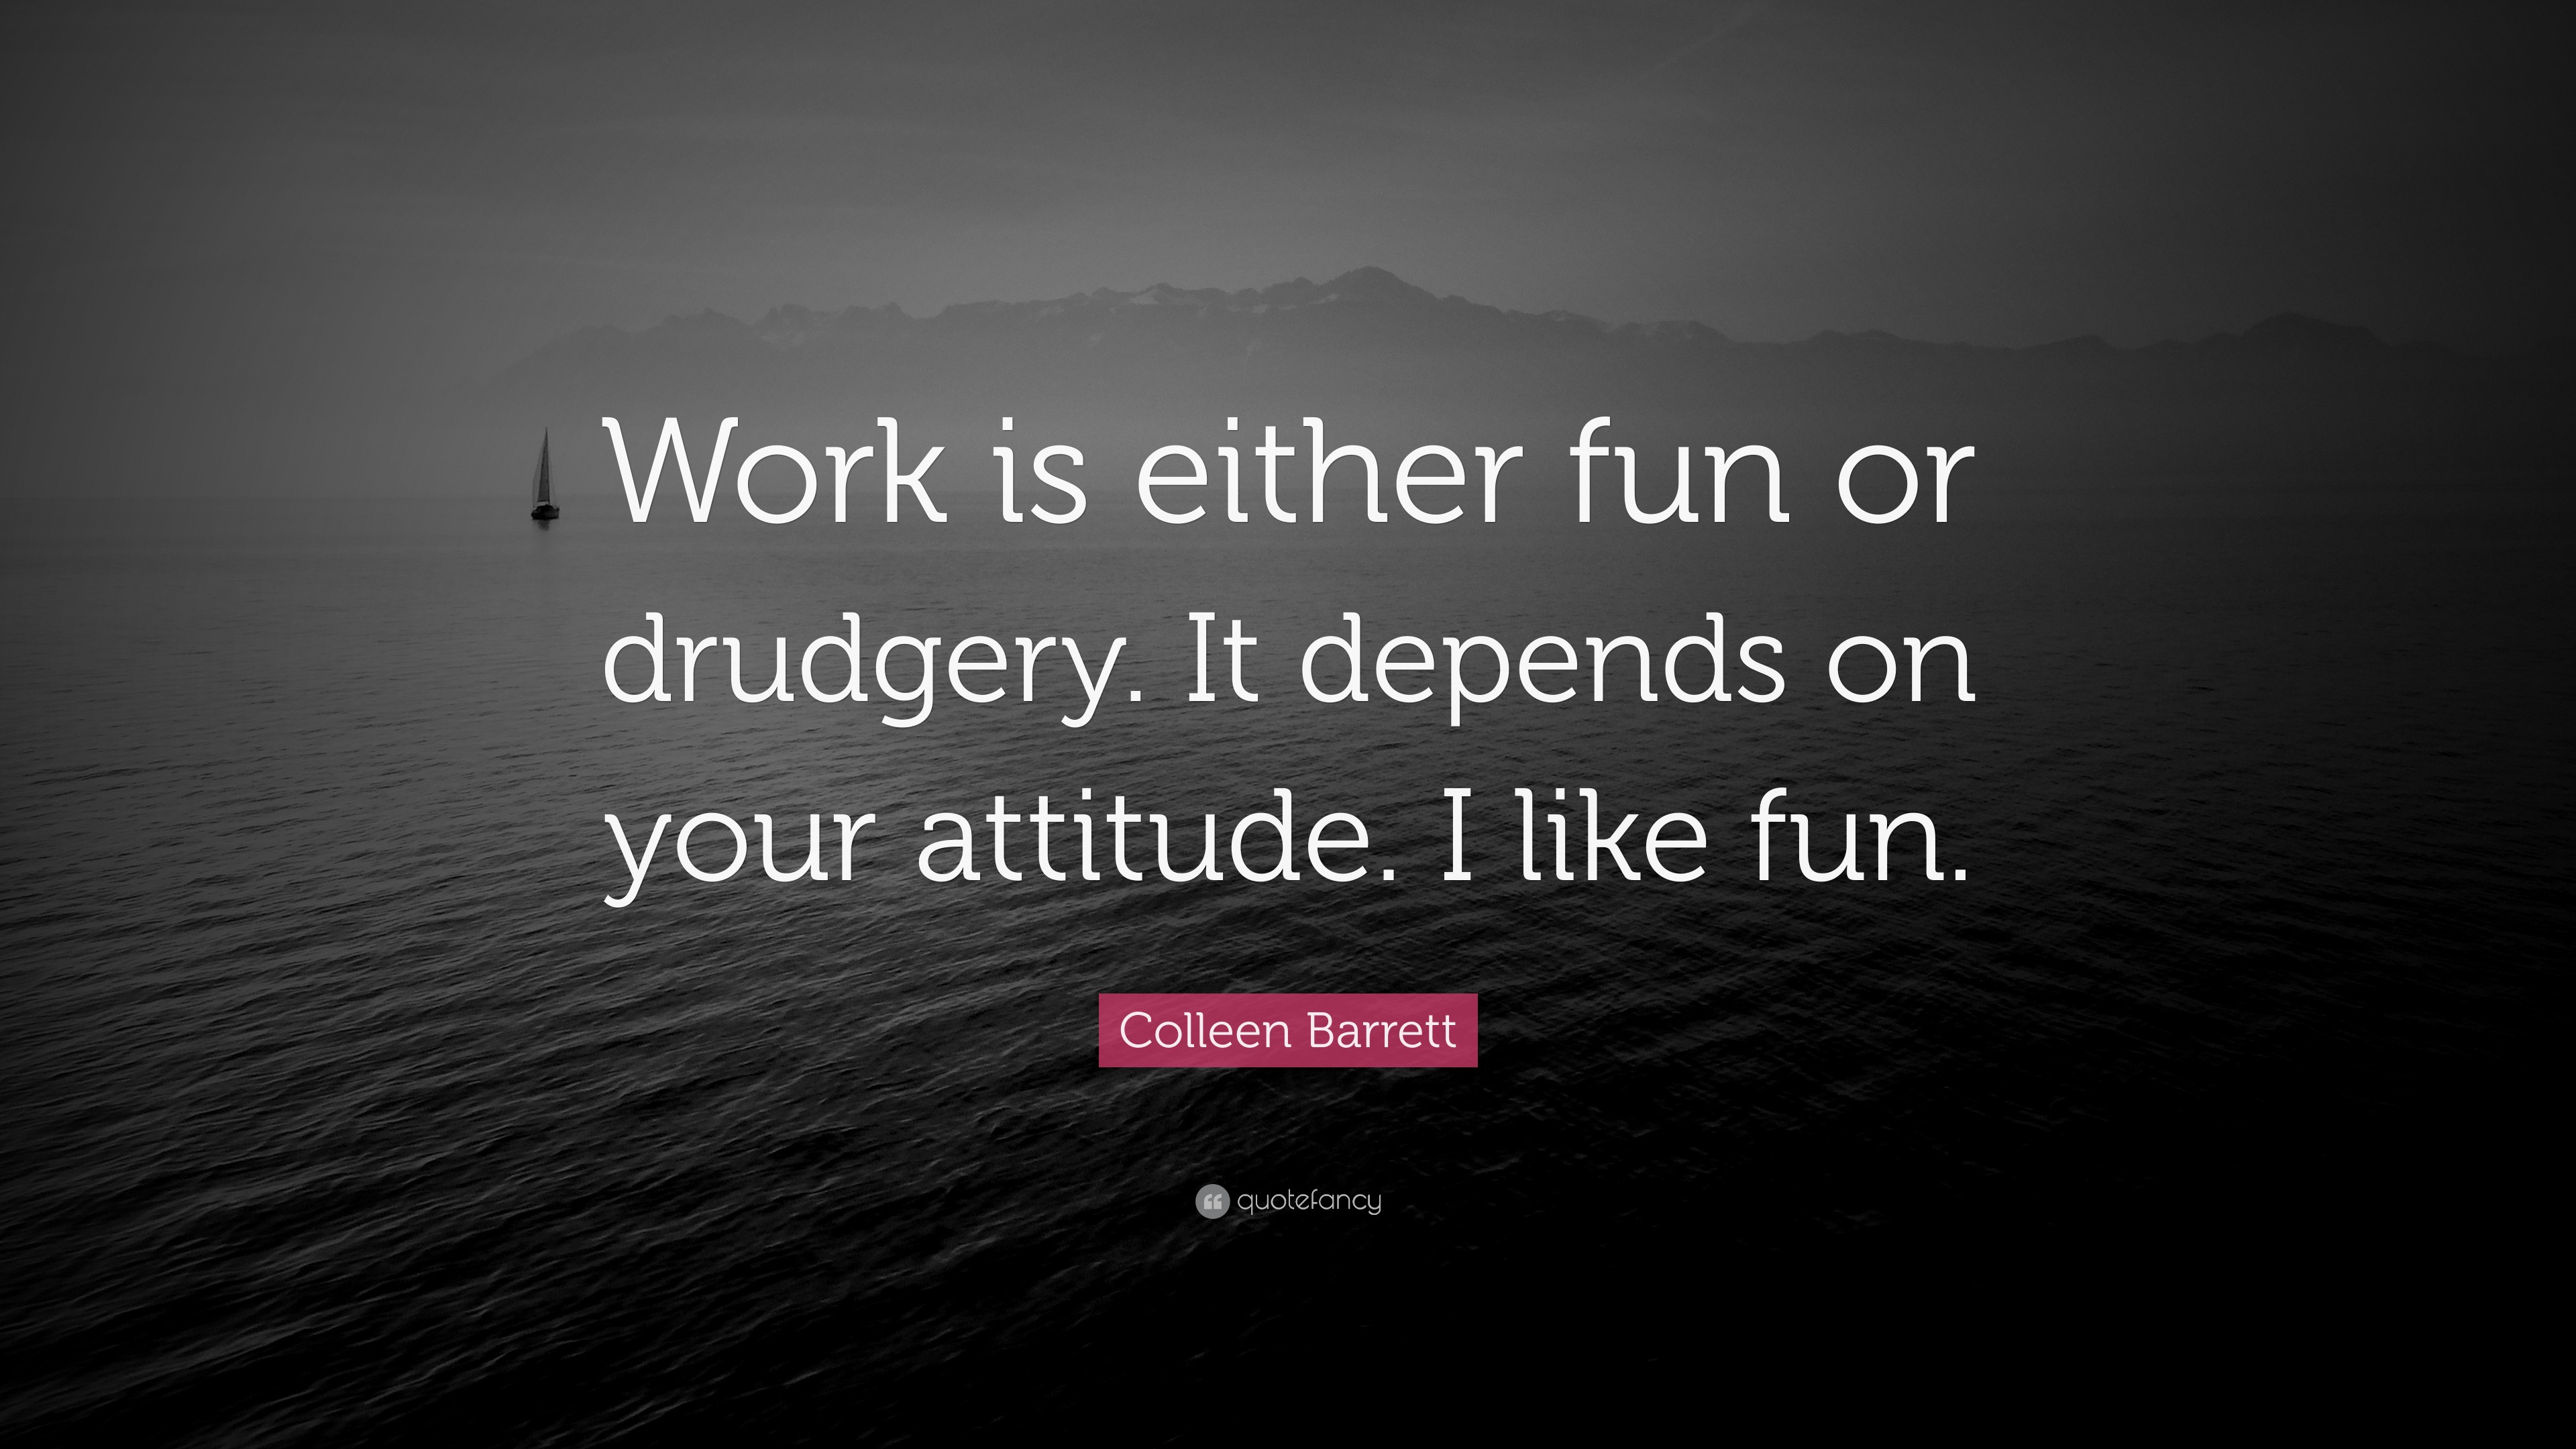 Colleen Barrett Quote: “Work is either fun or drudgery. It depends on